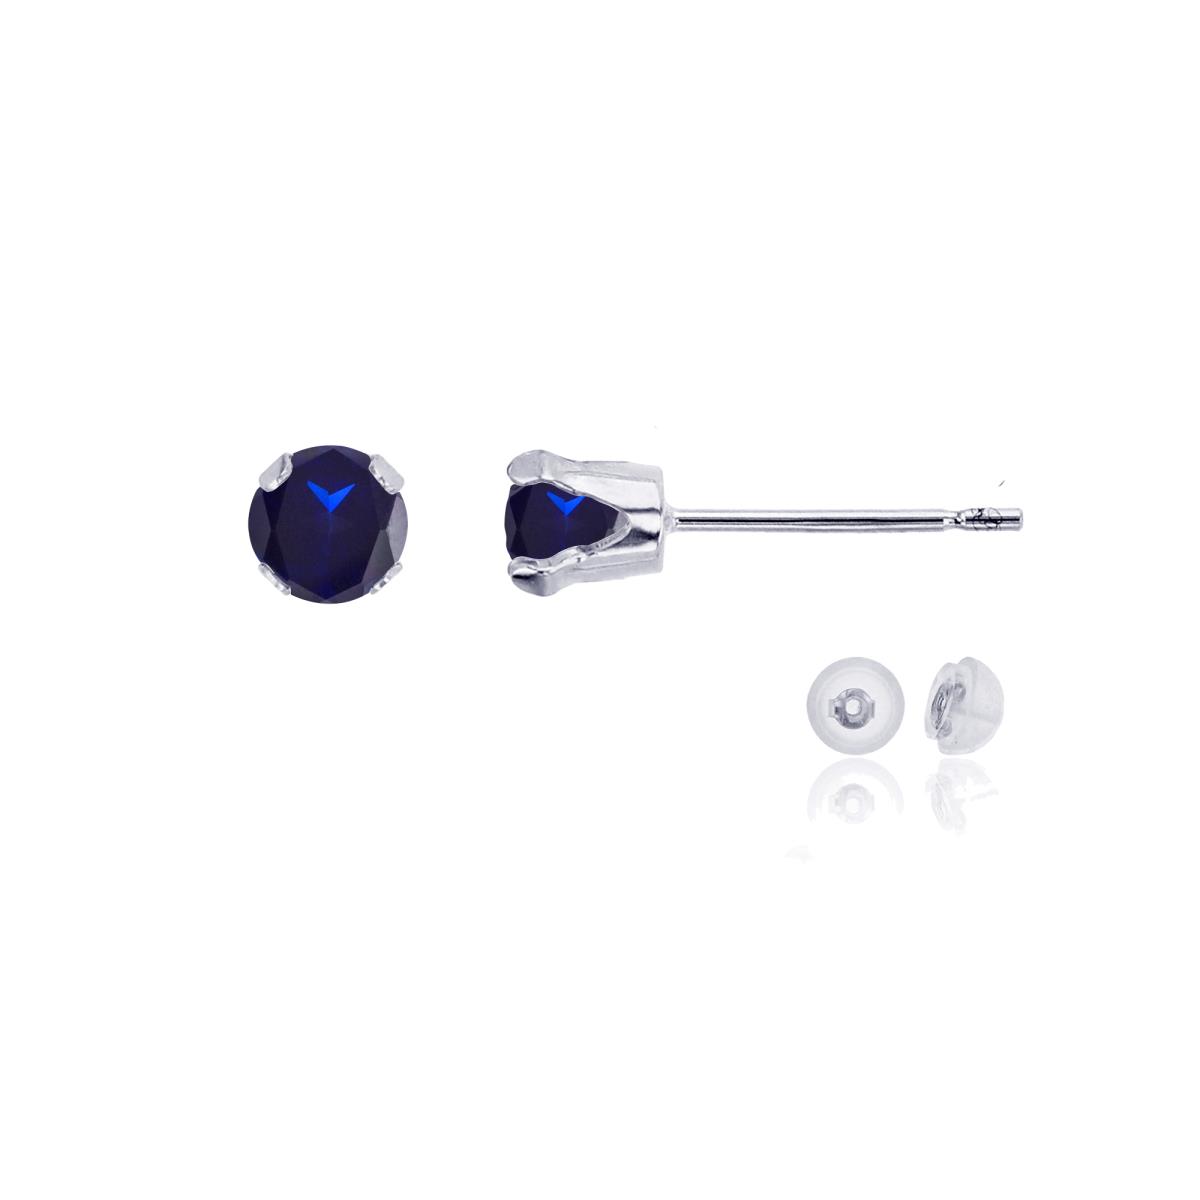 10K White Gold 4mm Round Sapphire Stud Earring with Silicone Back